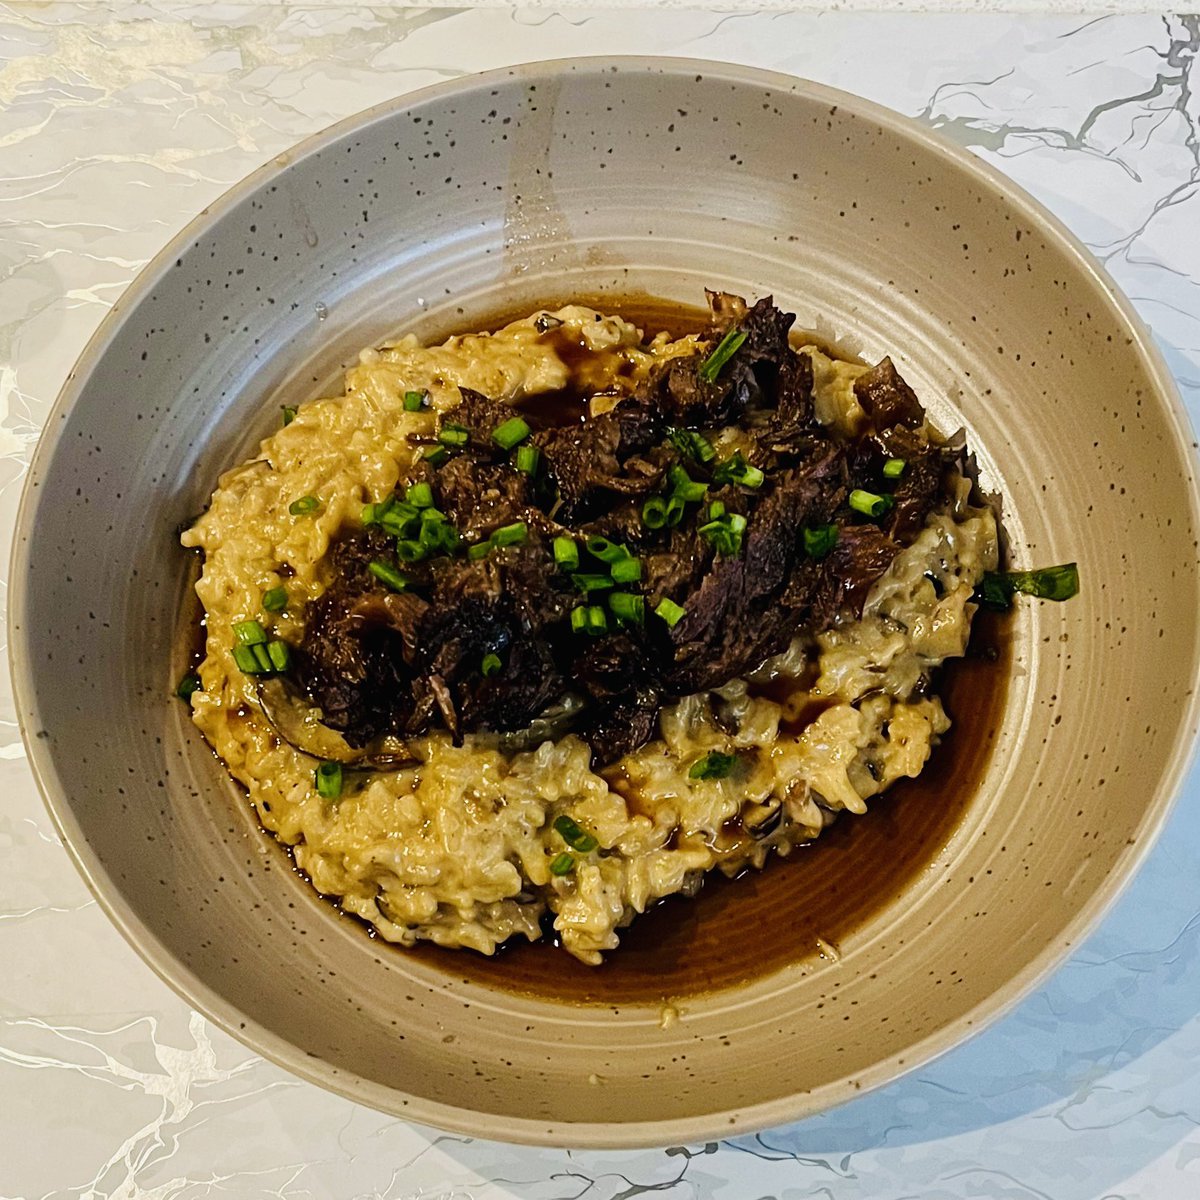 Last night I made Porcini Risotto and Red Wine Braised Short Rib, Enhanced with a Rosemary and Citrus-Infused Merlot Jus.